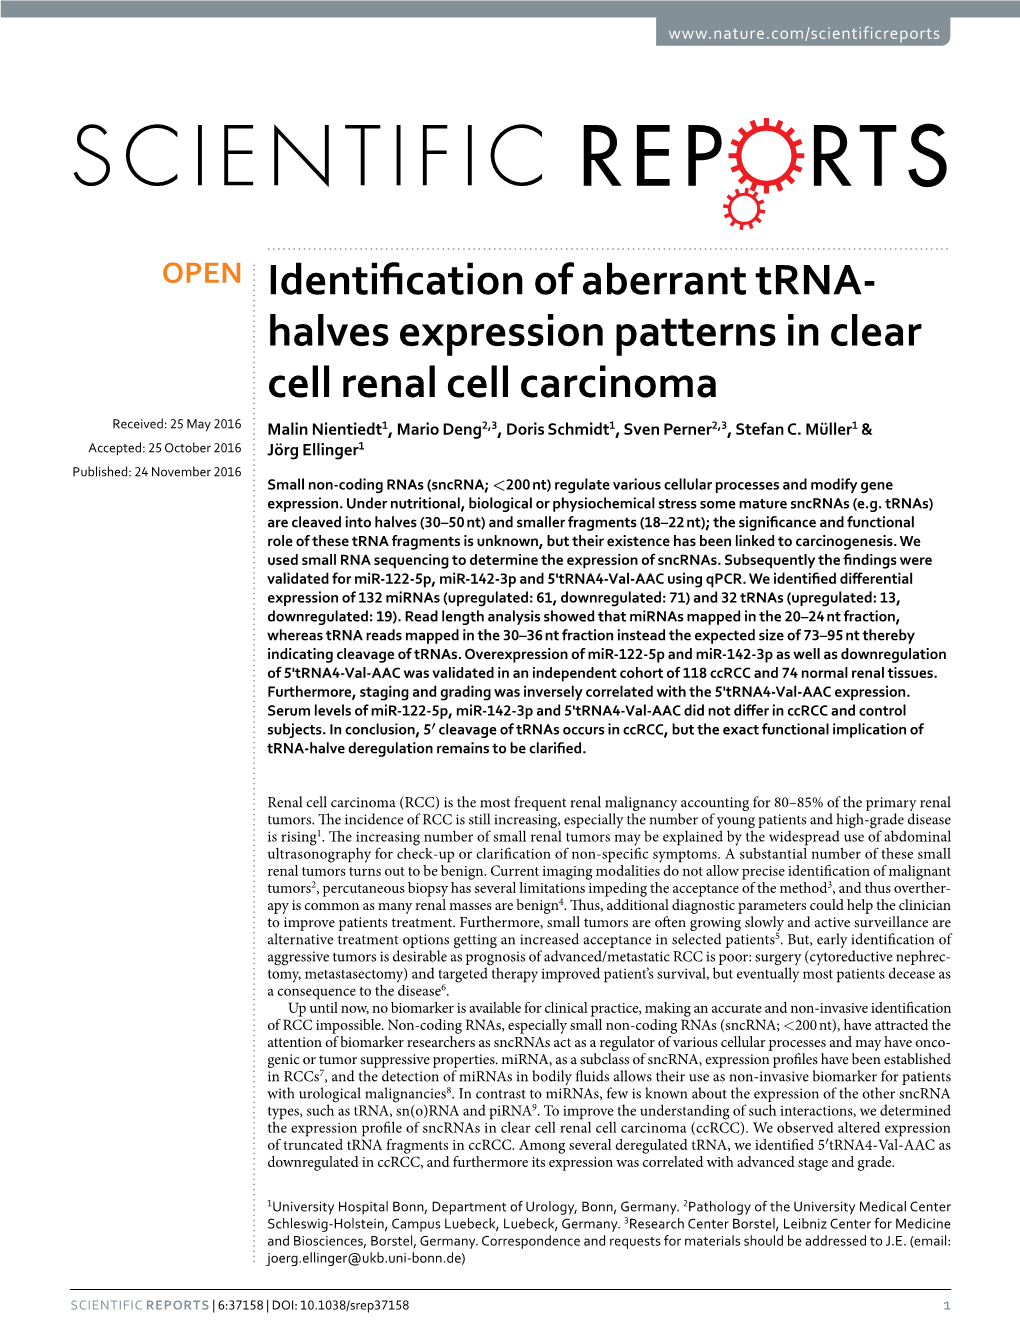 Identification of Aberrant Trna-Halves Expression Patterns in Clear Cell Renal Cell Carcinoma